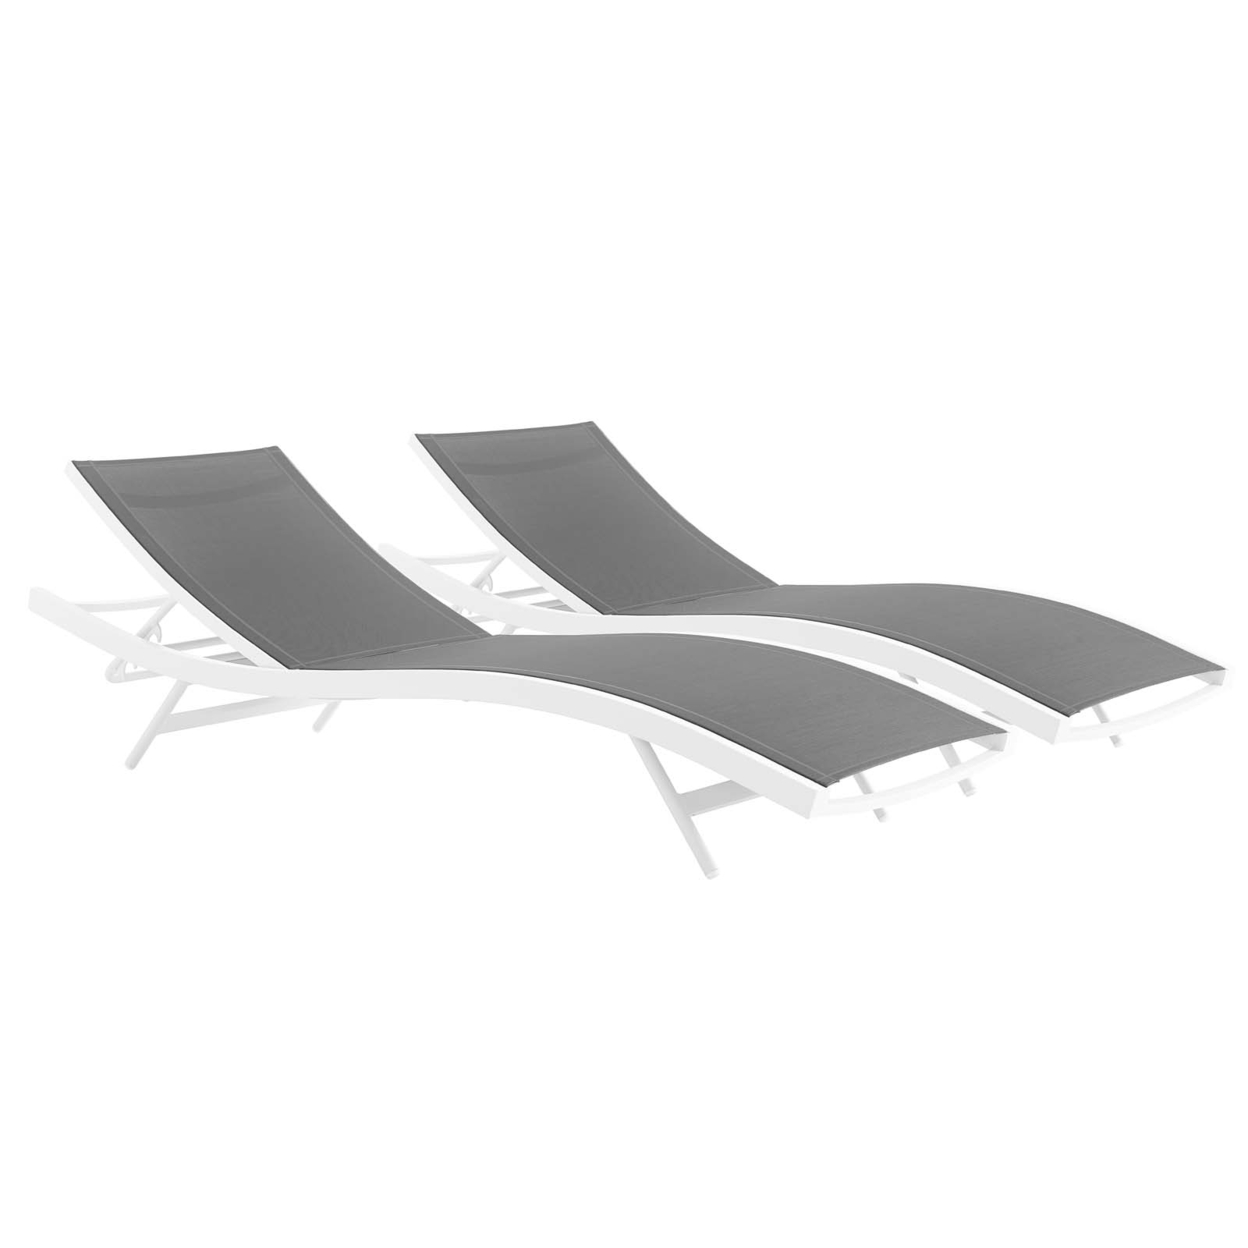 Glimpse Outdoor Patio Mesh Chaise Lounge Set Of 2, White Gray